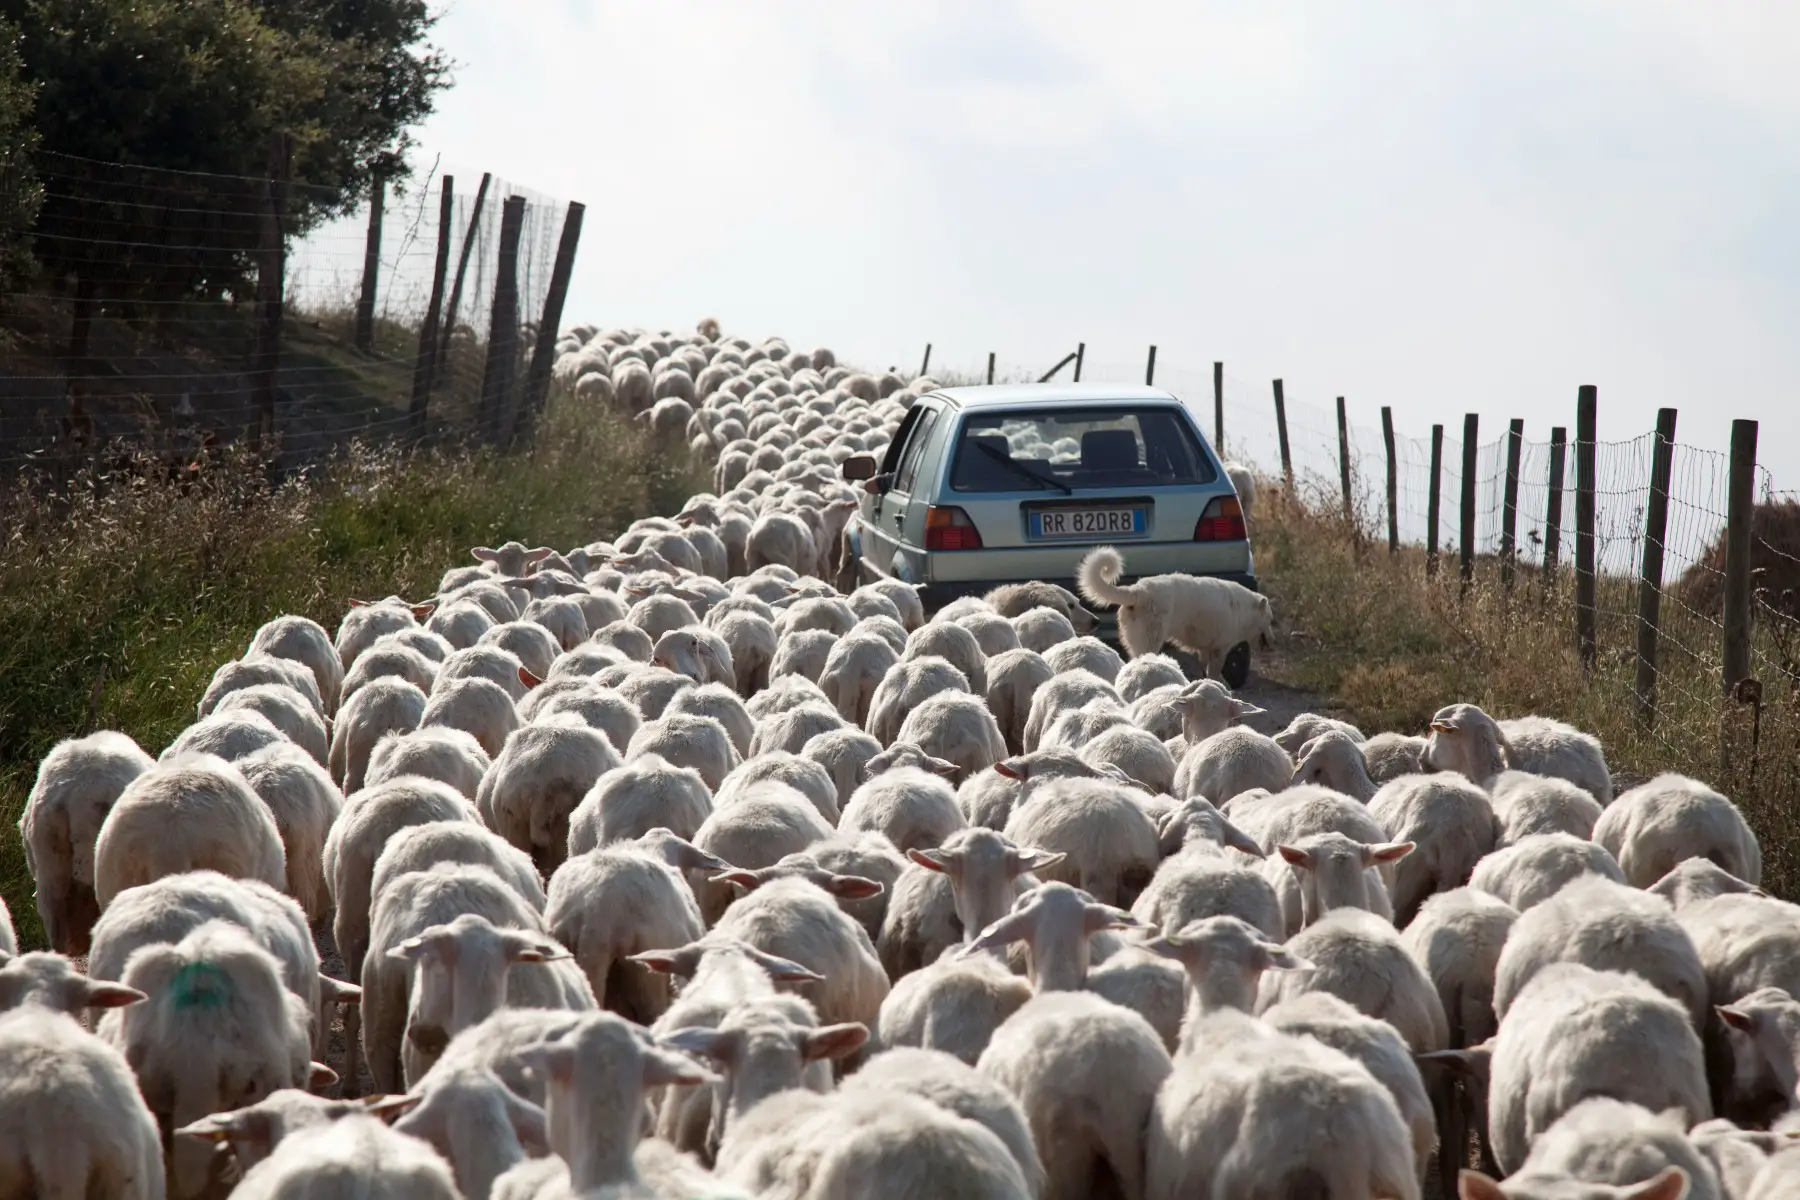 Small car is caught in a herd of sheep on a rural road in Tuscany, Italy, license plate clearly visible.